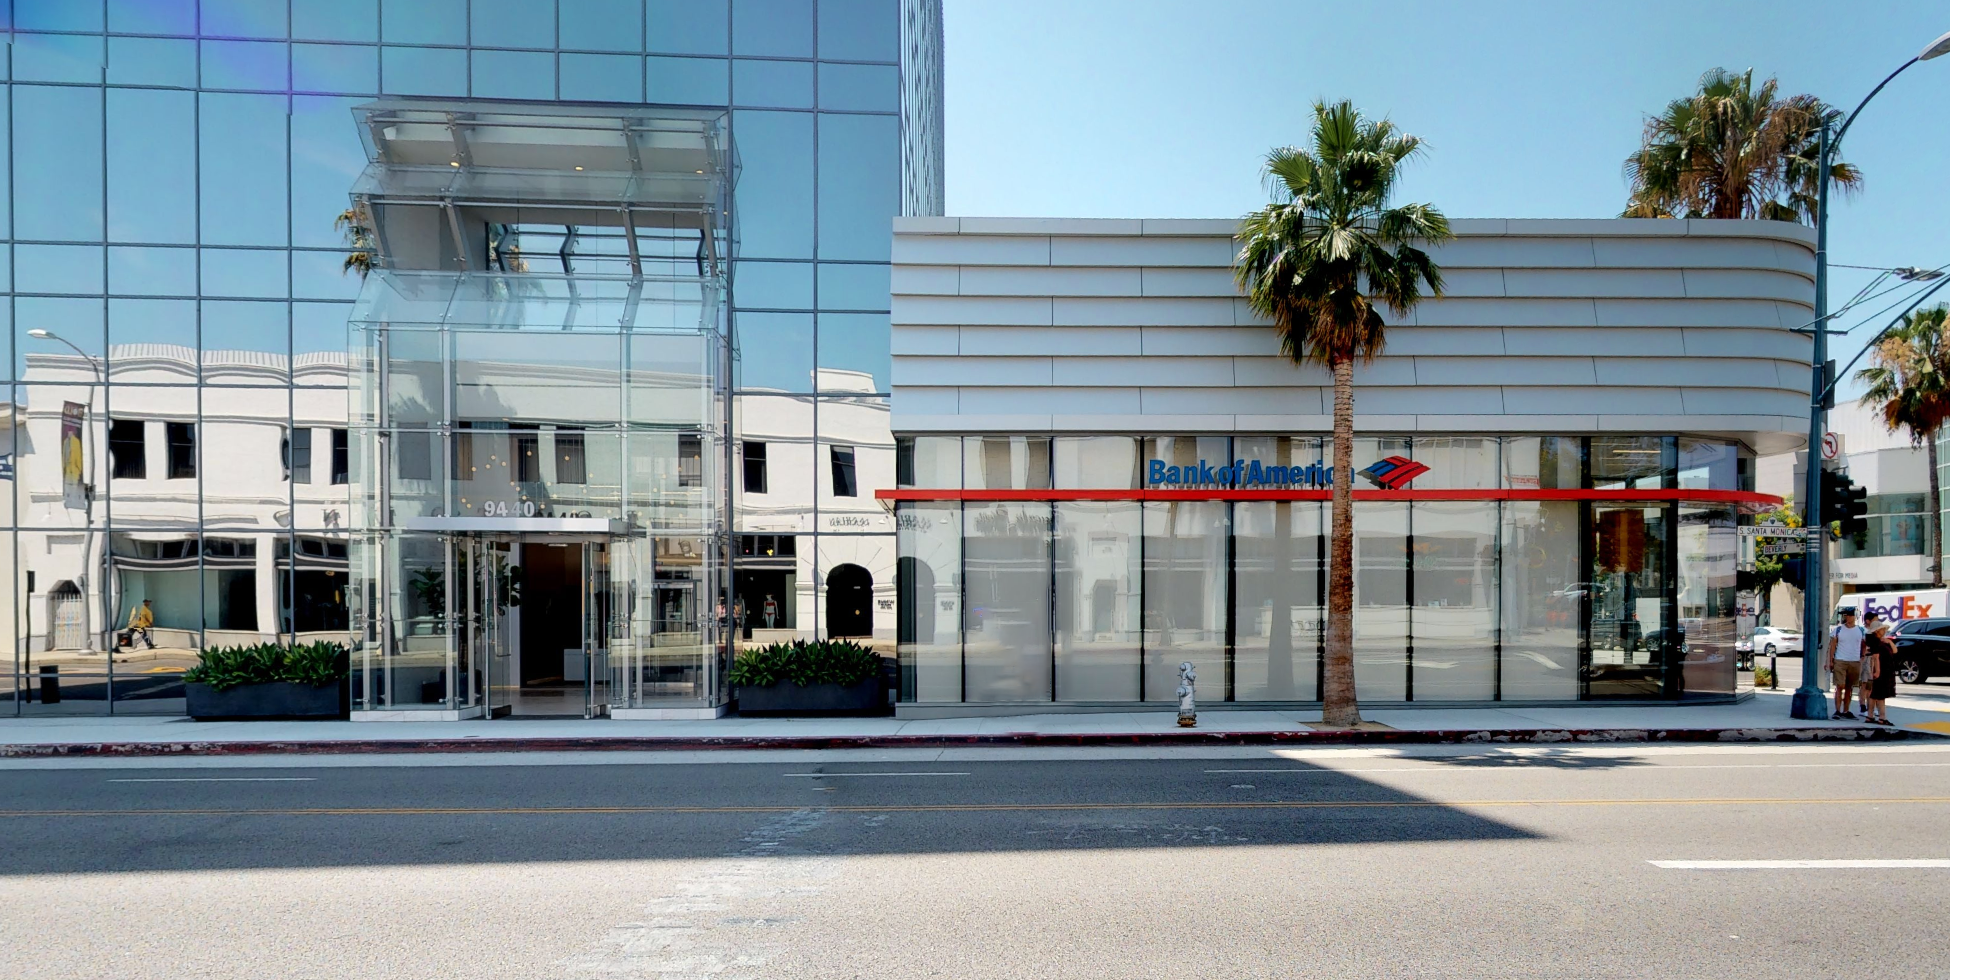 Bank of America financial center with walk-up ATM | 468 N Beverly Dr, Beverly Hills, CA 90210